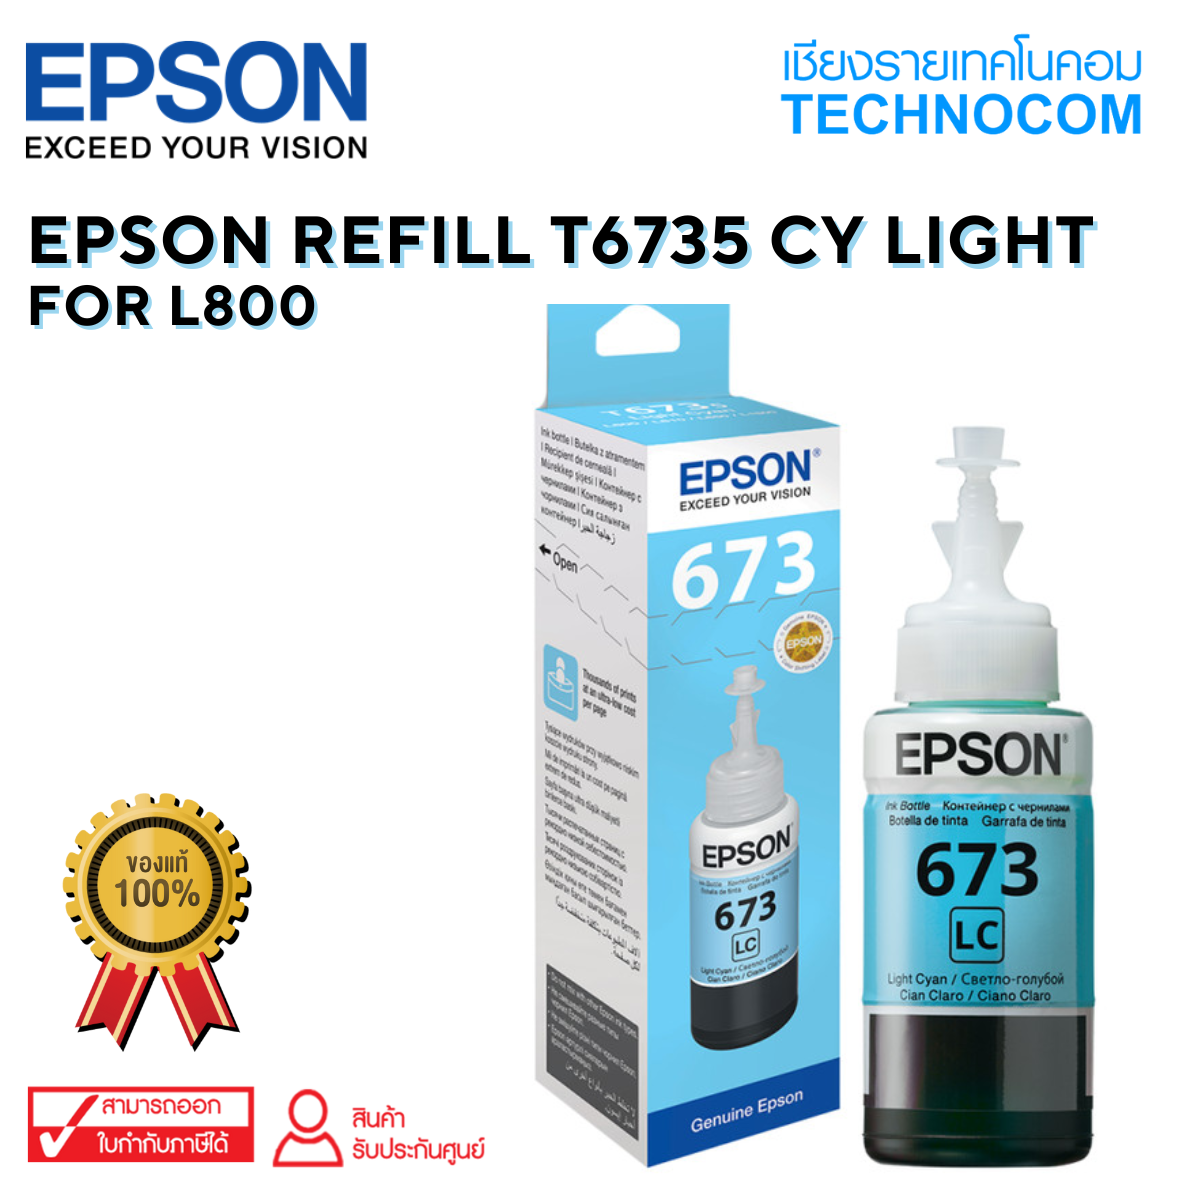 EPSON REFILL T6735 CY Light For L800